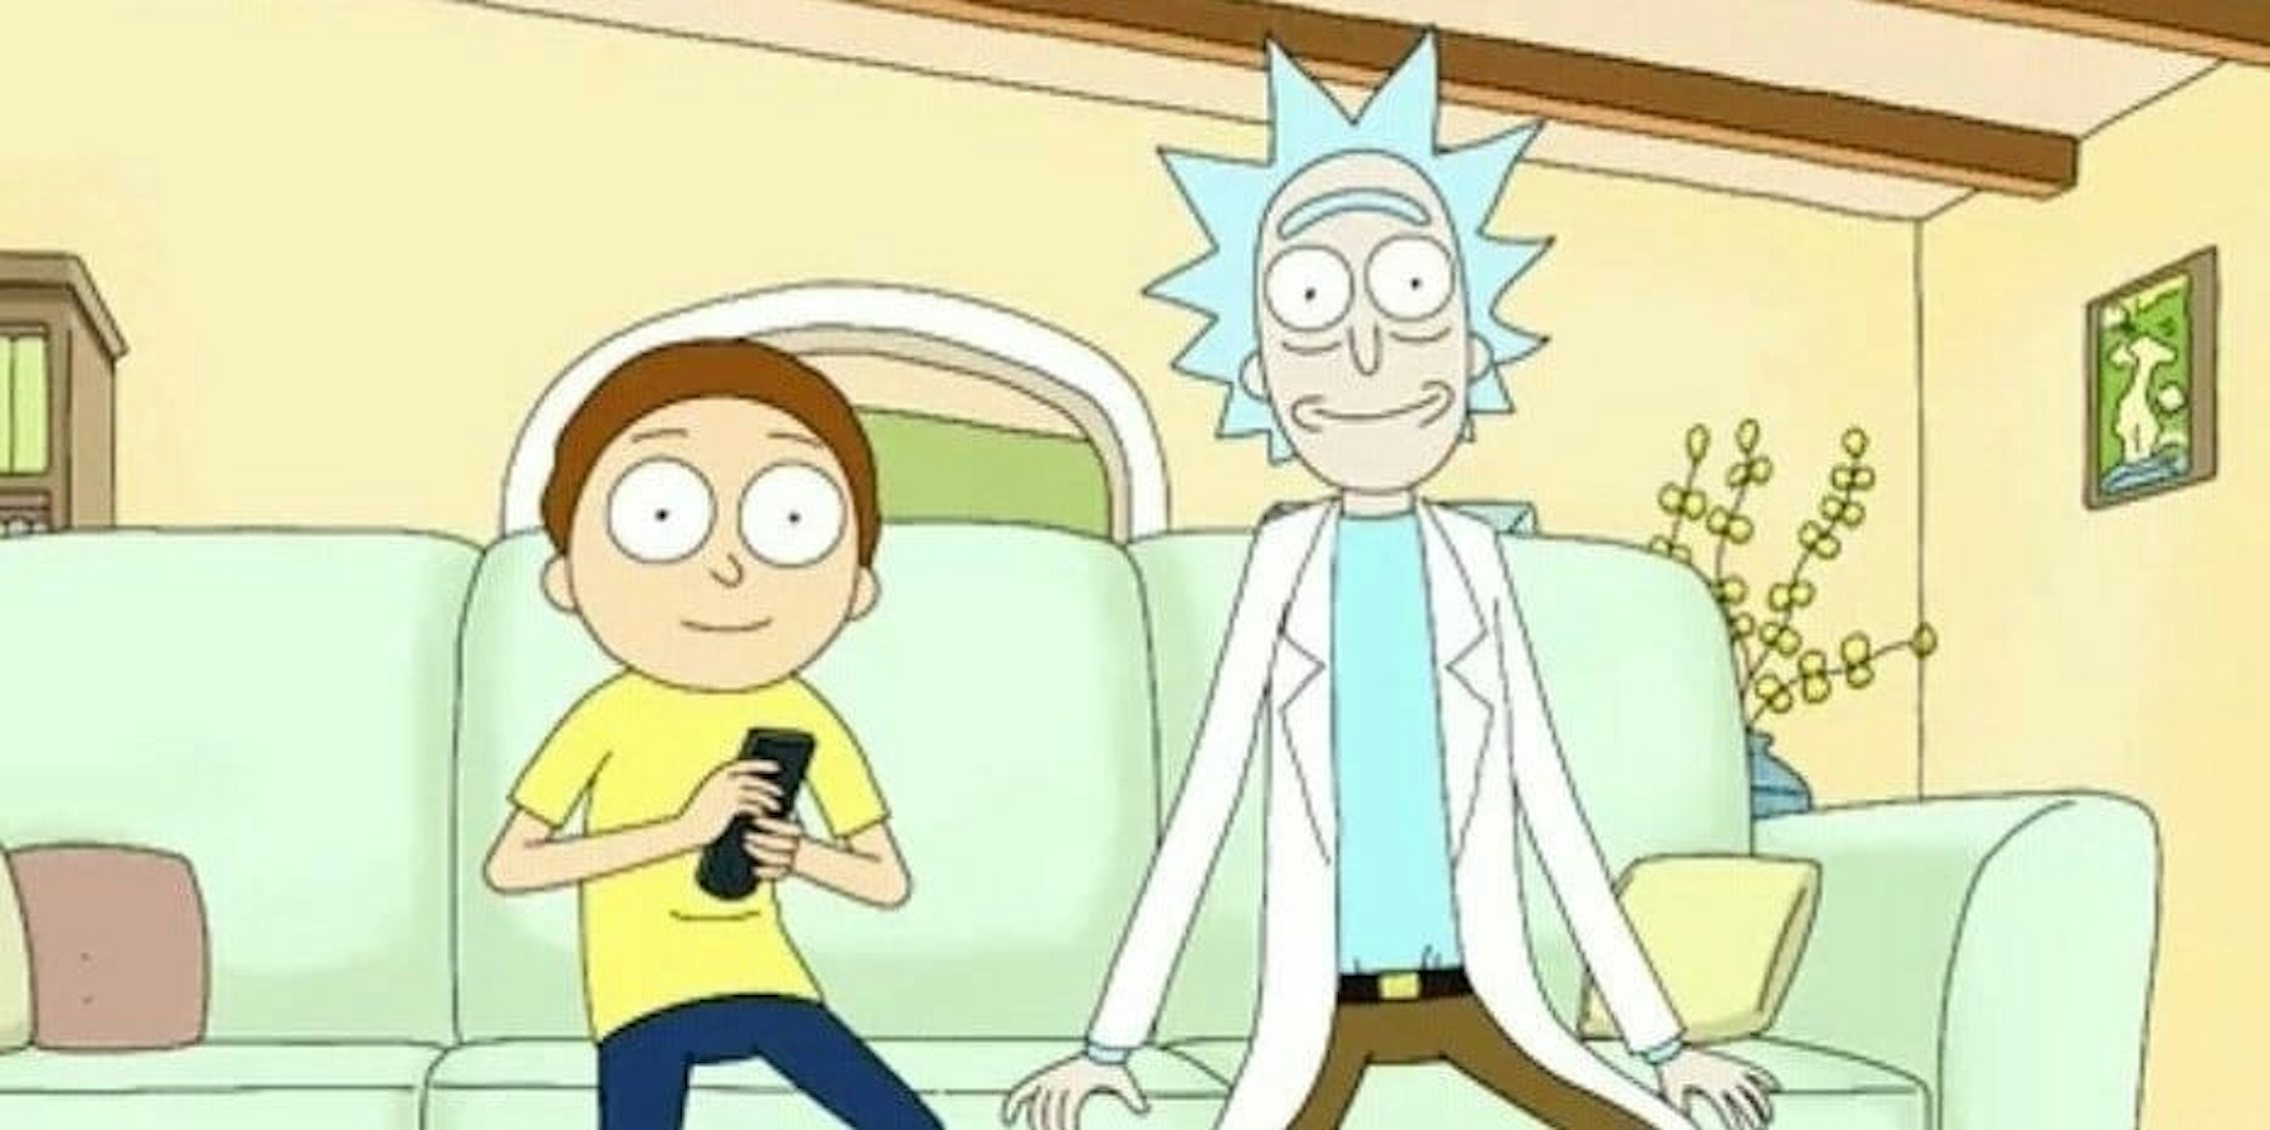 This Dank 'Rick and Morty' Meme Thread Proves Need for Net Neutrality